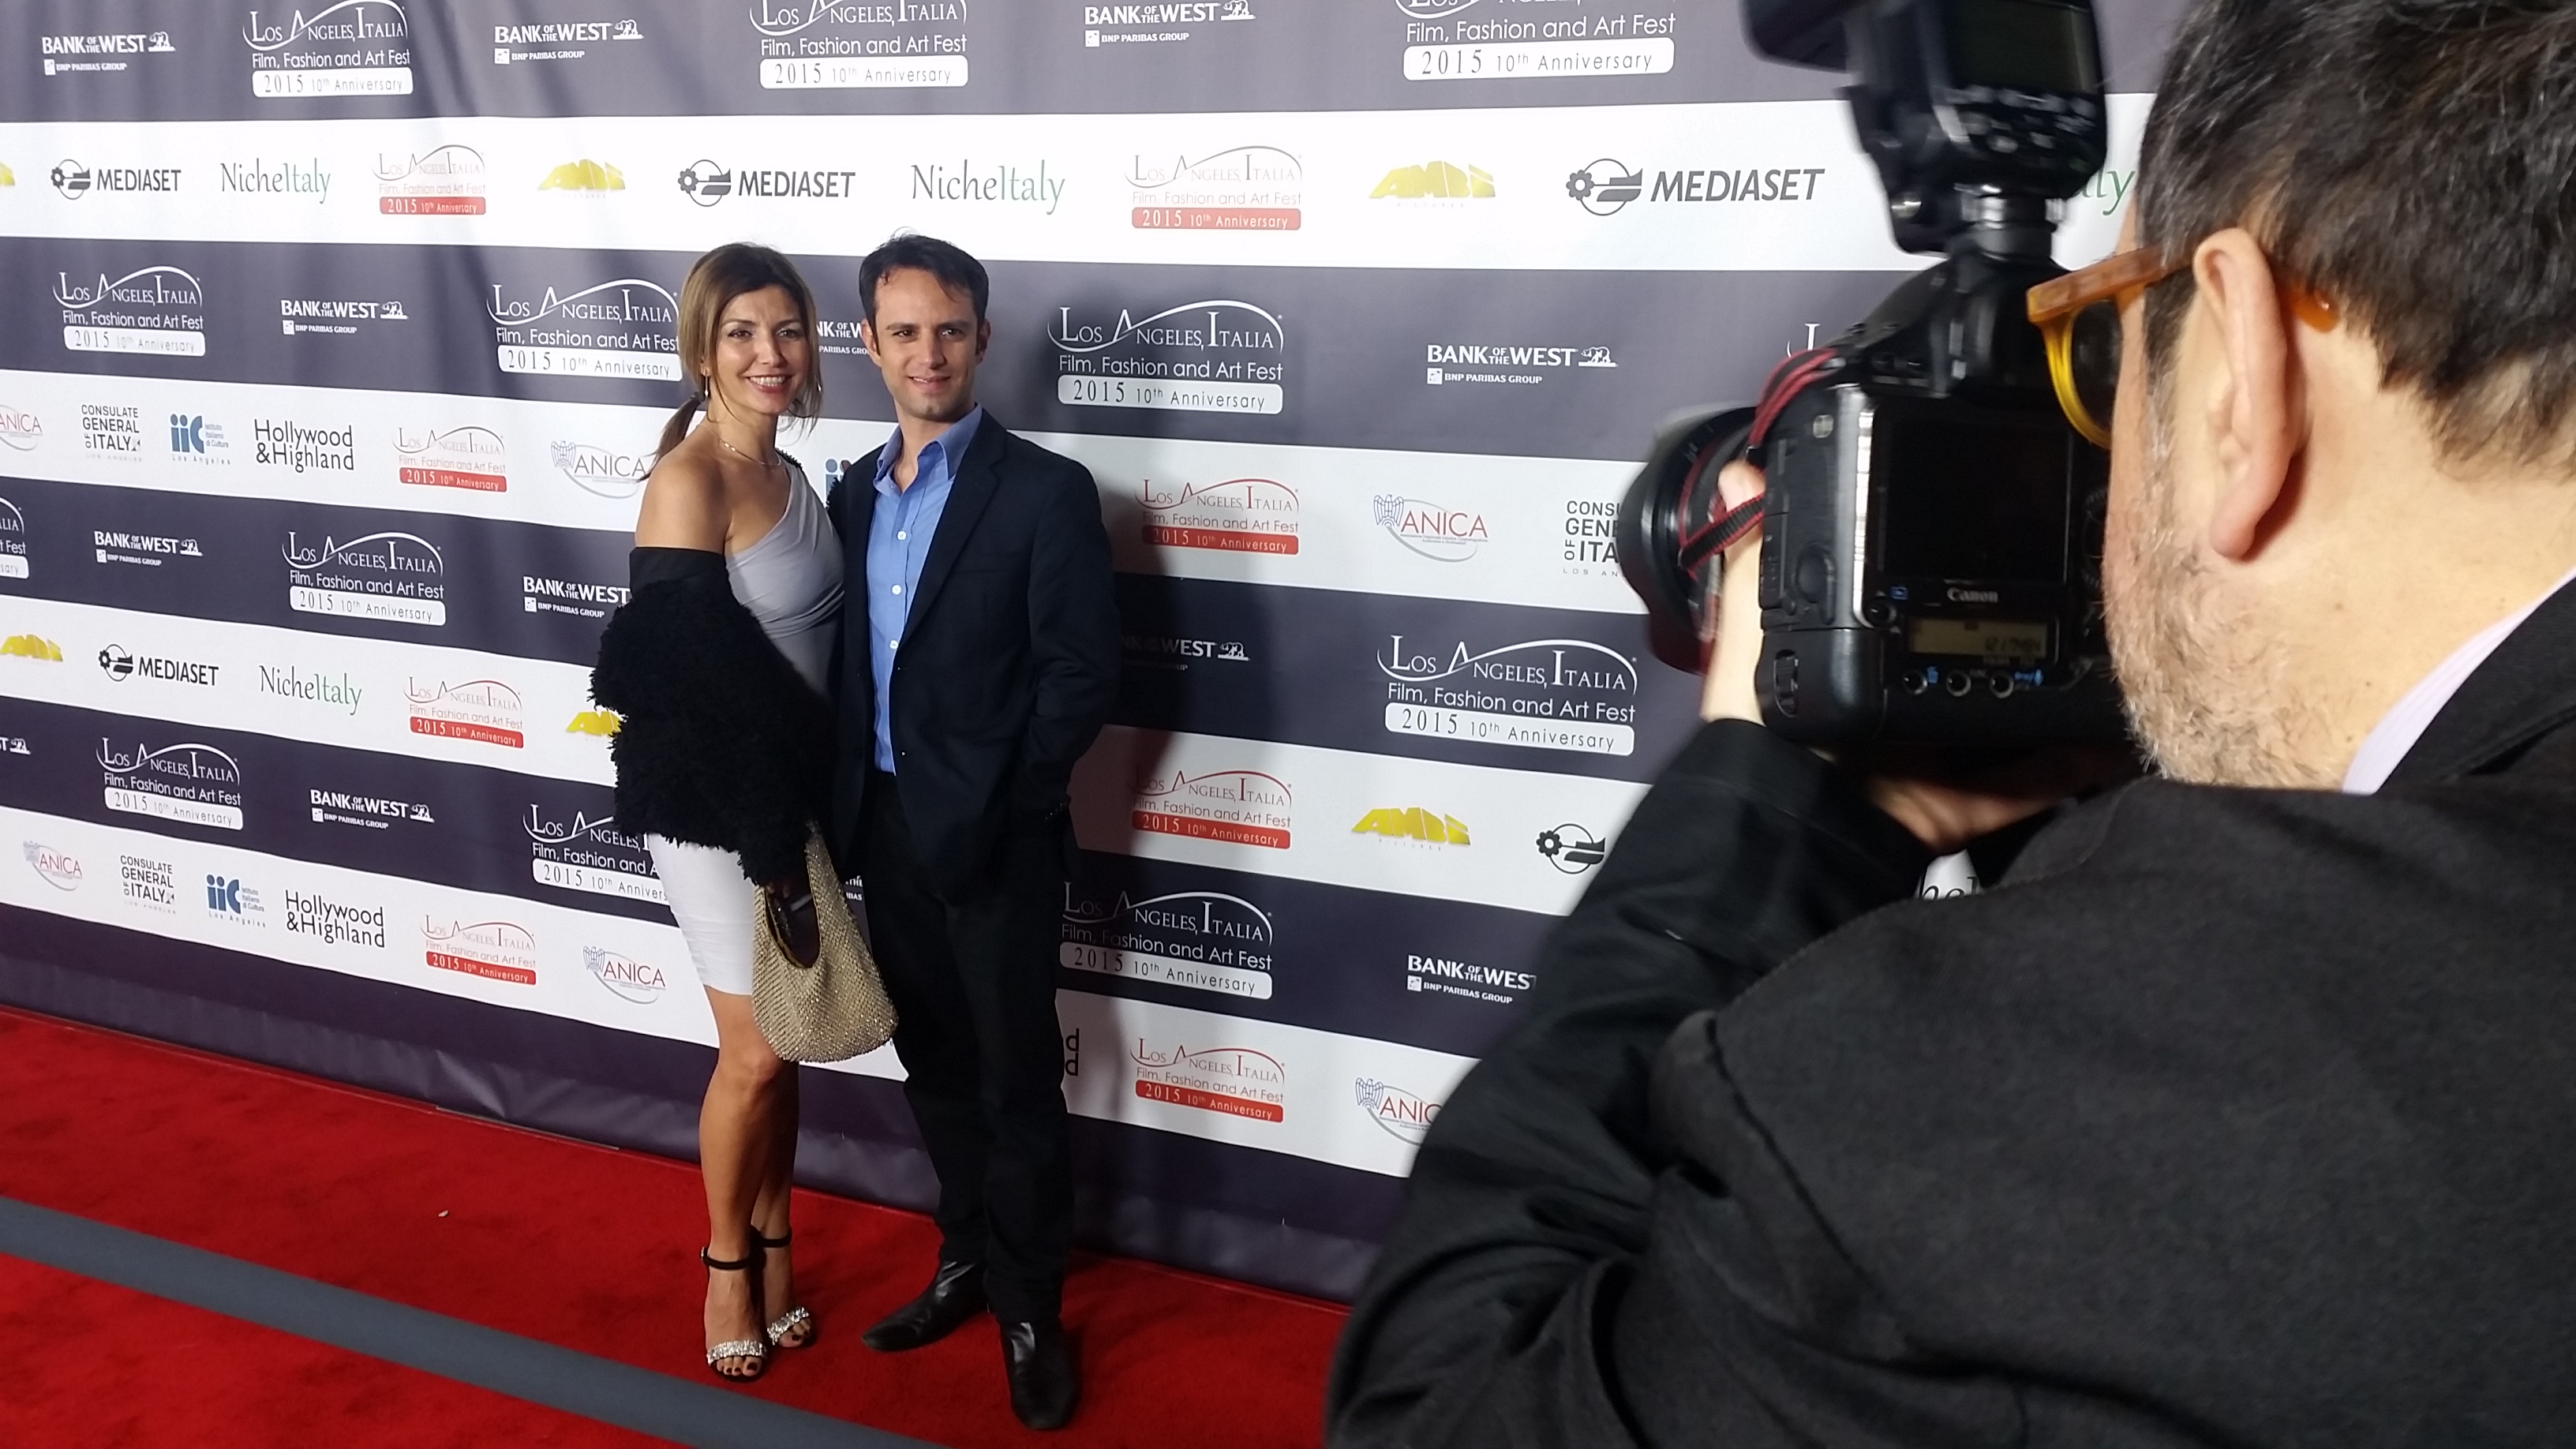 Maximilian Law and Romina Caruana at a Los Angeles red carpet premiere.